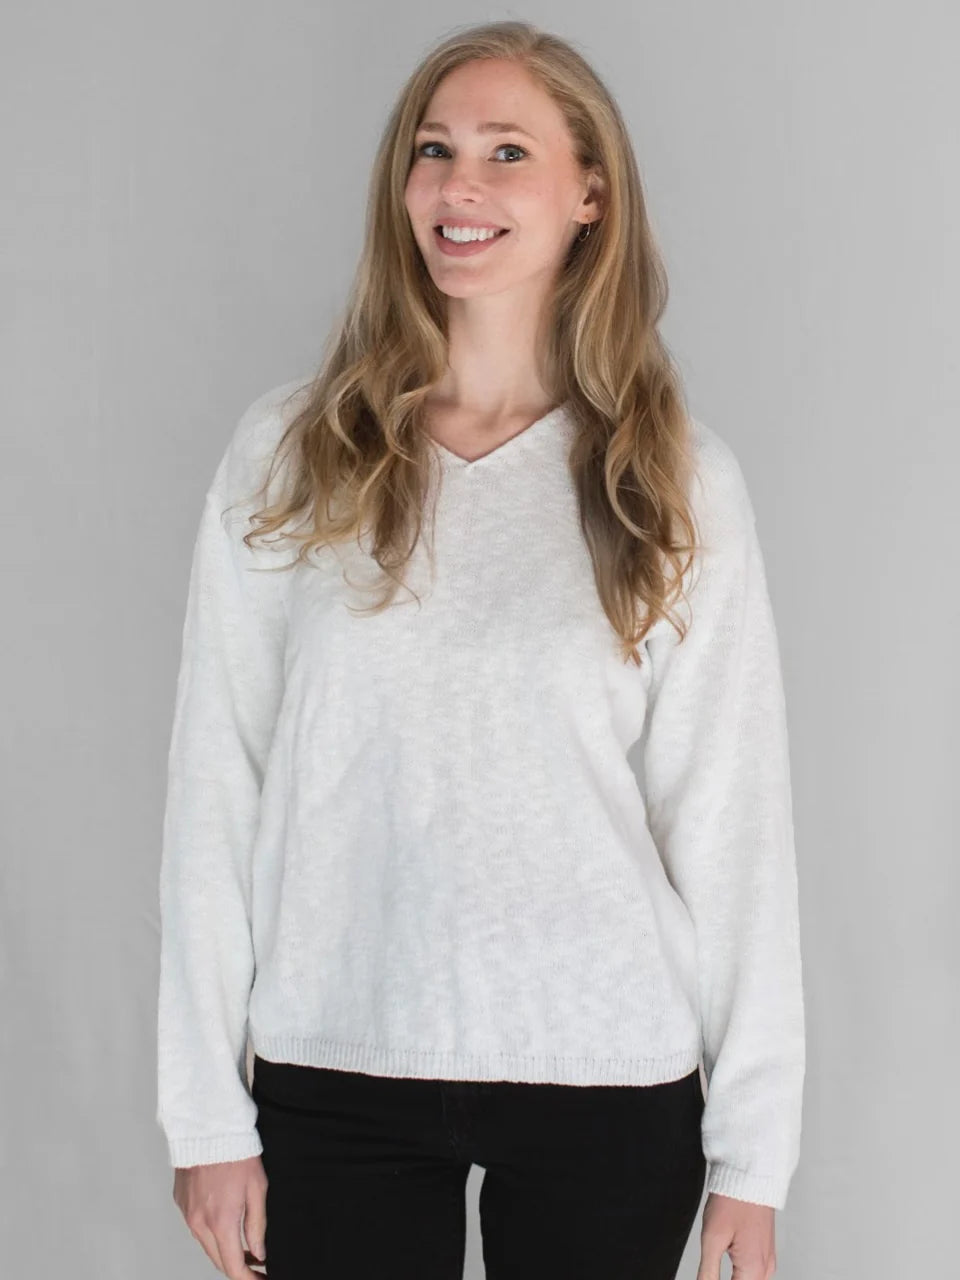 This Cotton Slub sweater is designed to fit most body types, with a v-neck and relaxed fit. Its mid-hip length for the petite and slightly below the belt for the tall offer comfort and convenience. Additionally, it is both Machine Washable and proudly Made in the USA.